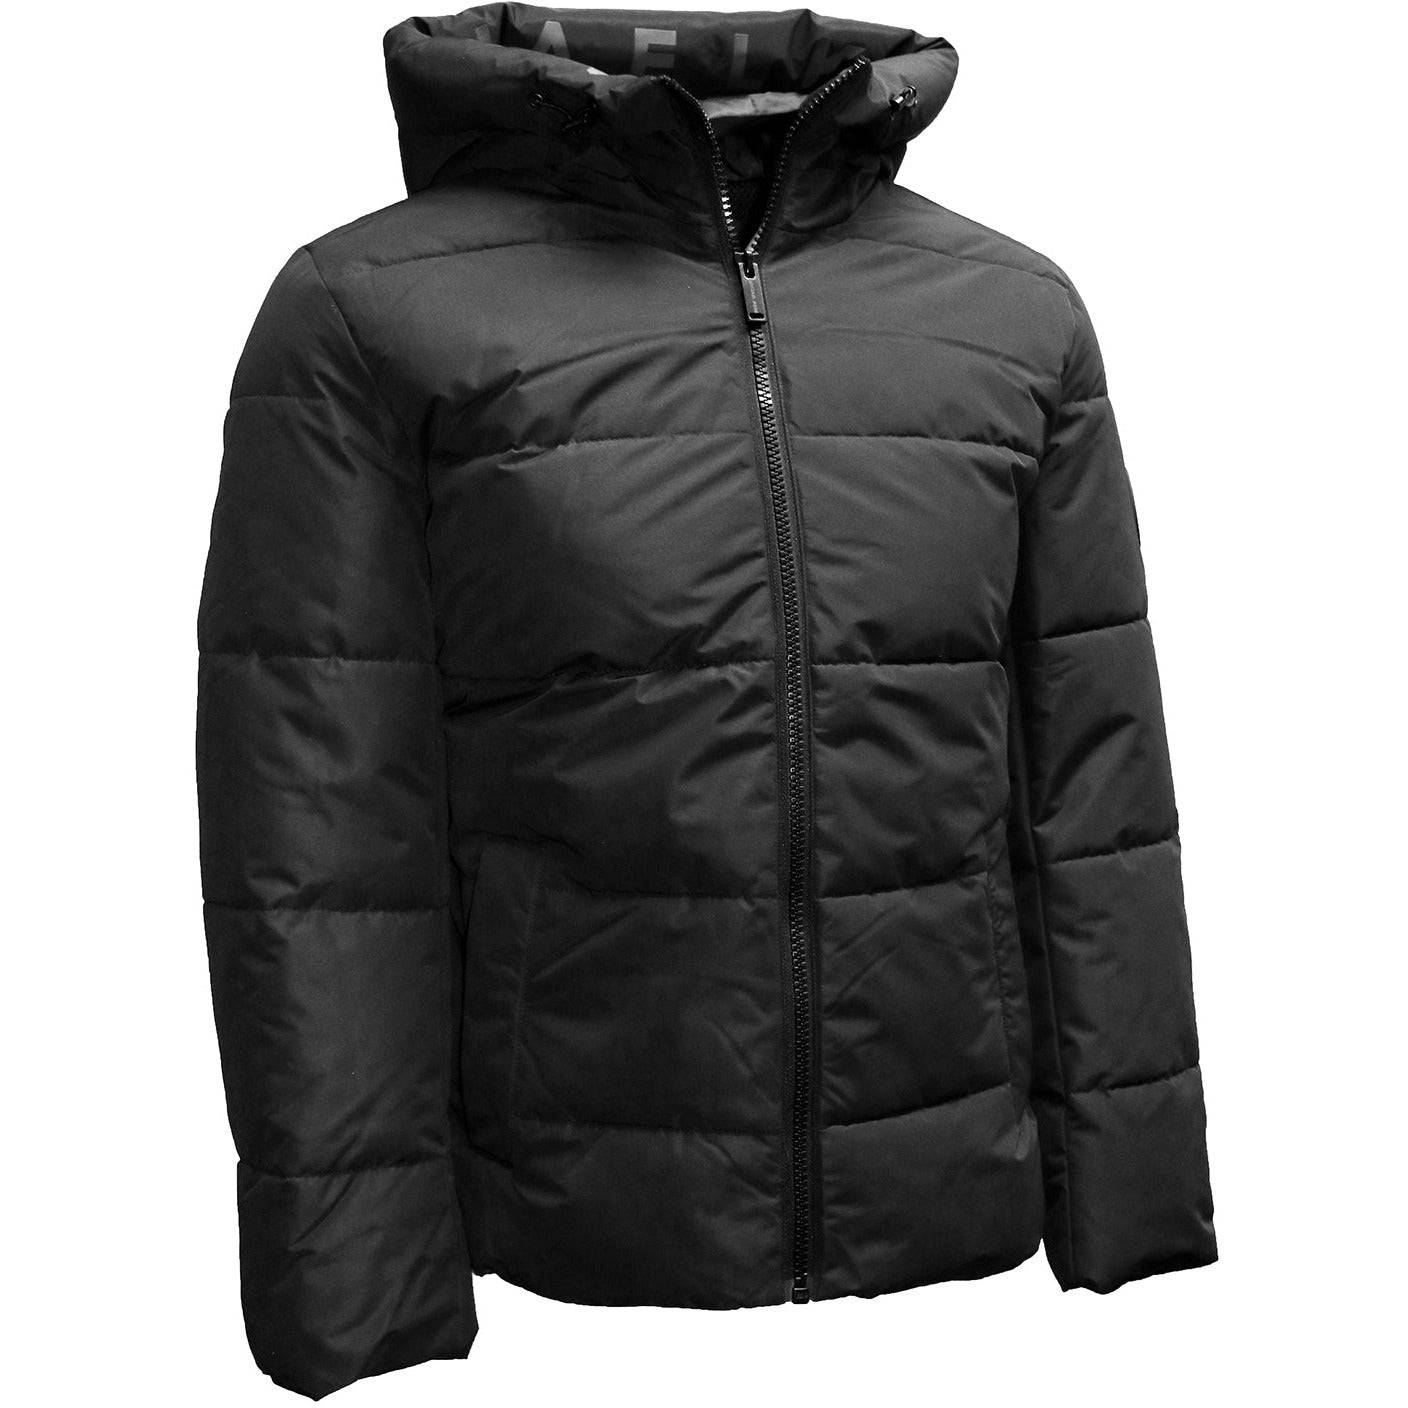 Michael Kors Men's Puffer Jacket with Attached Hood - Zooloo Leather